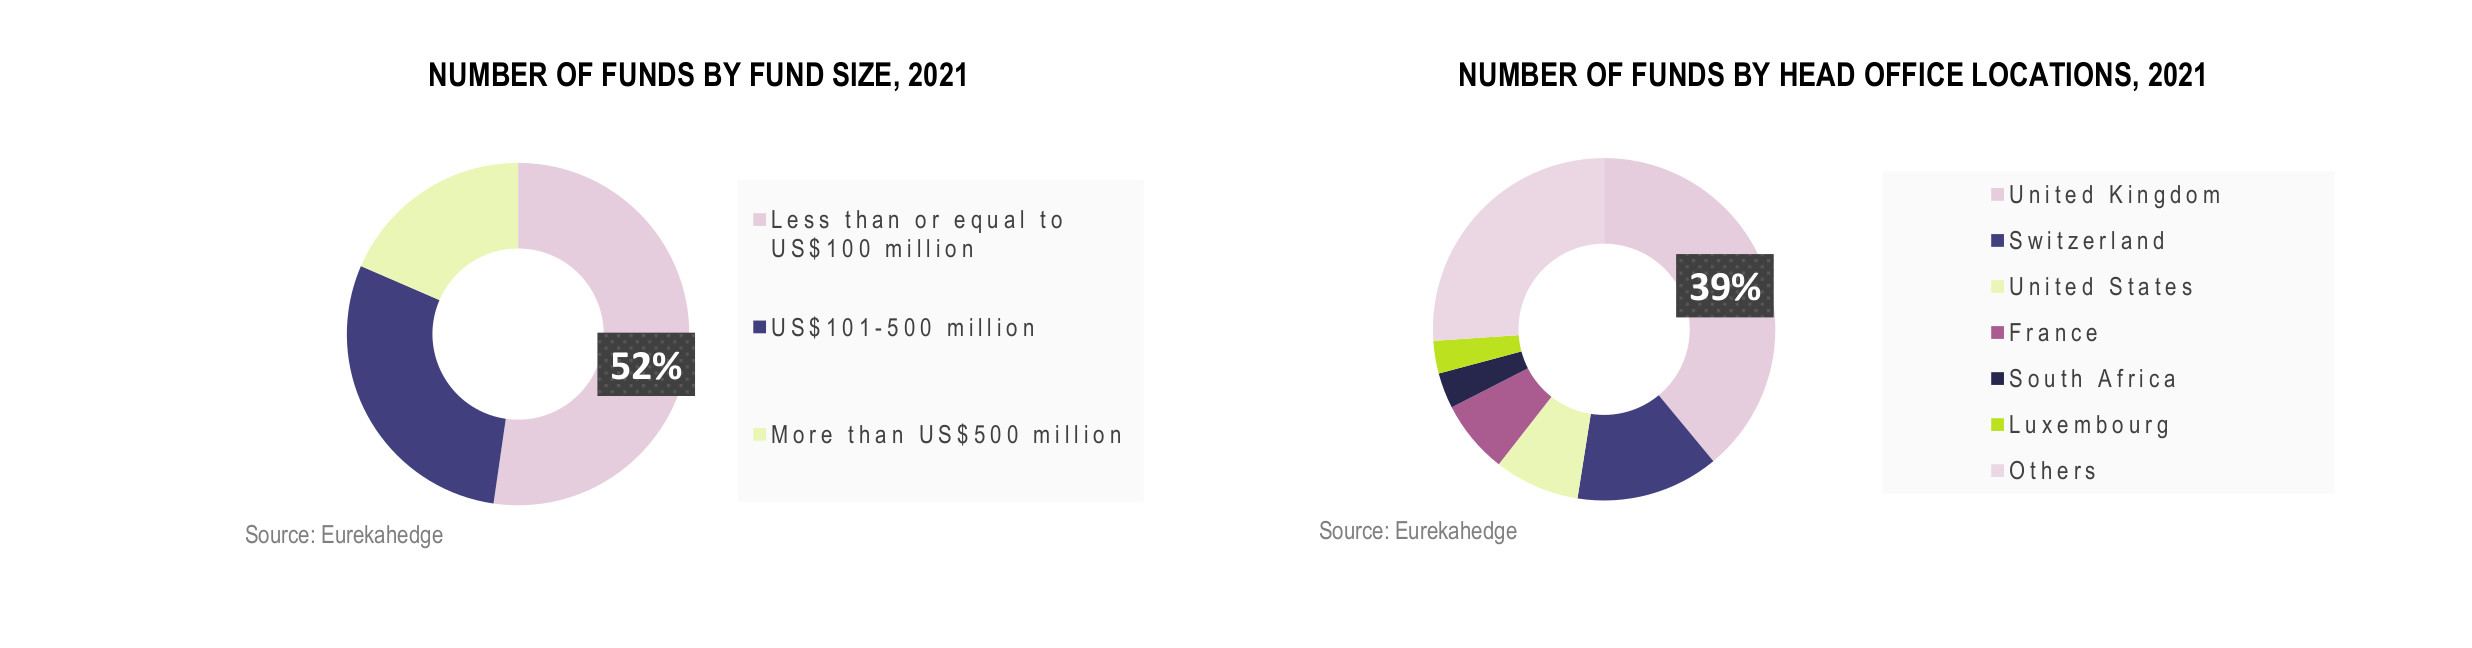 European Hedge Funds Infographic May 2021 - Number of funds by fund size and head office locations